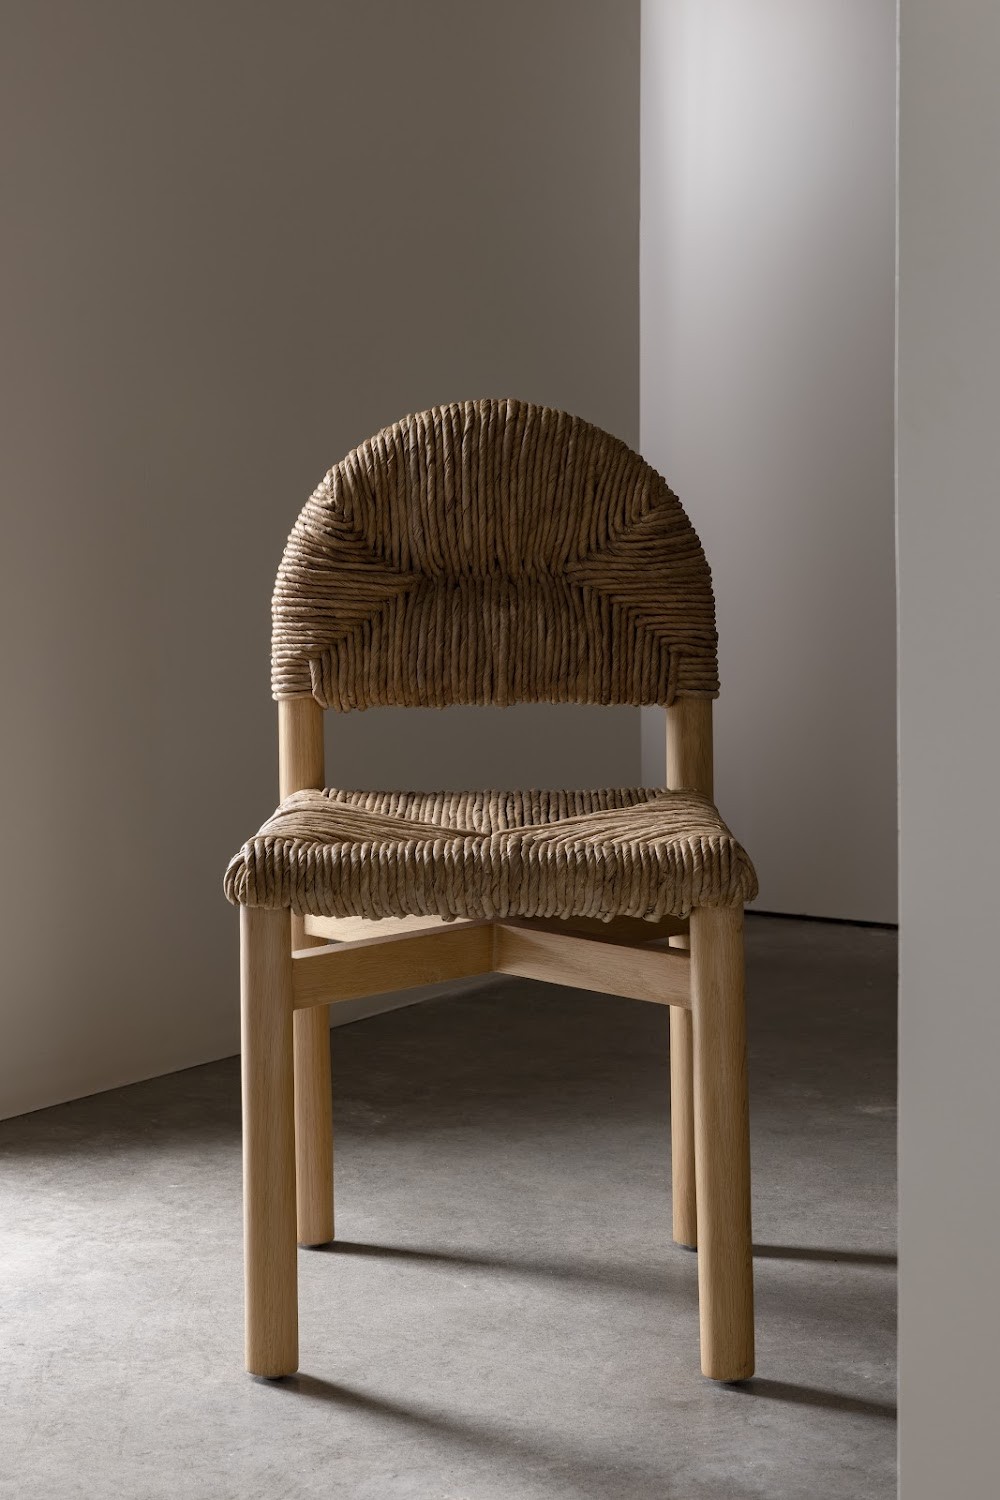 a chair made out of wicker sitting in a room